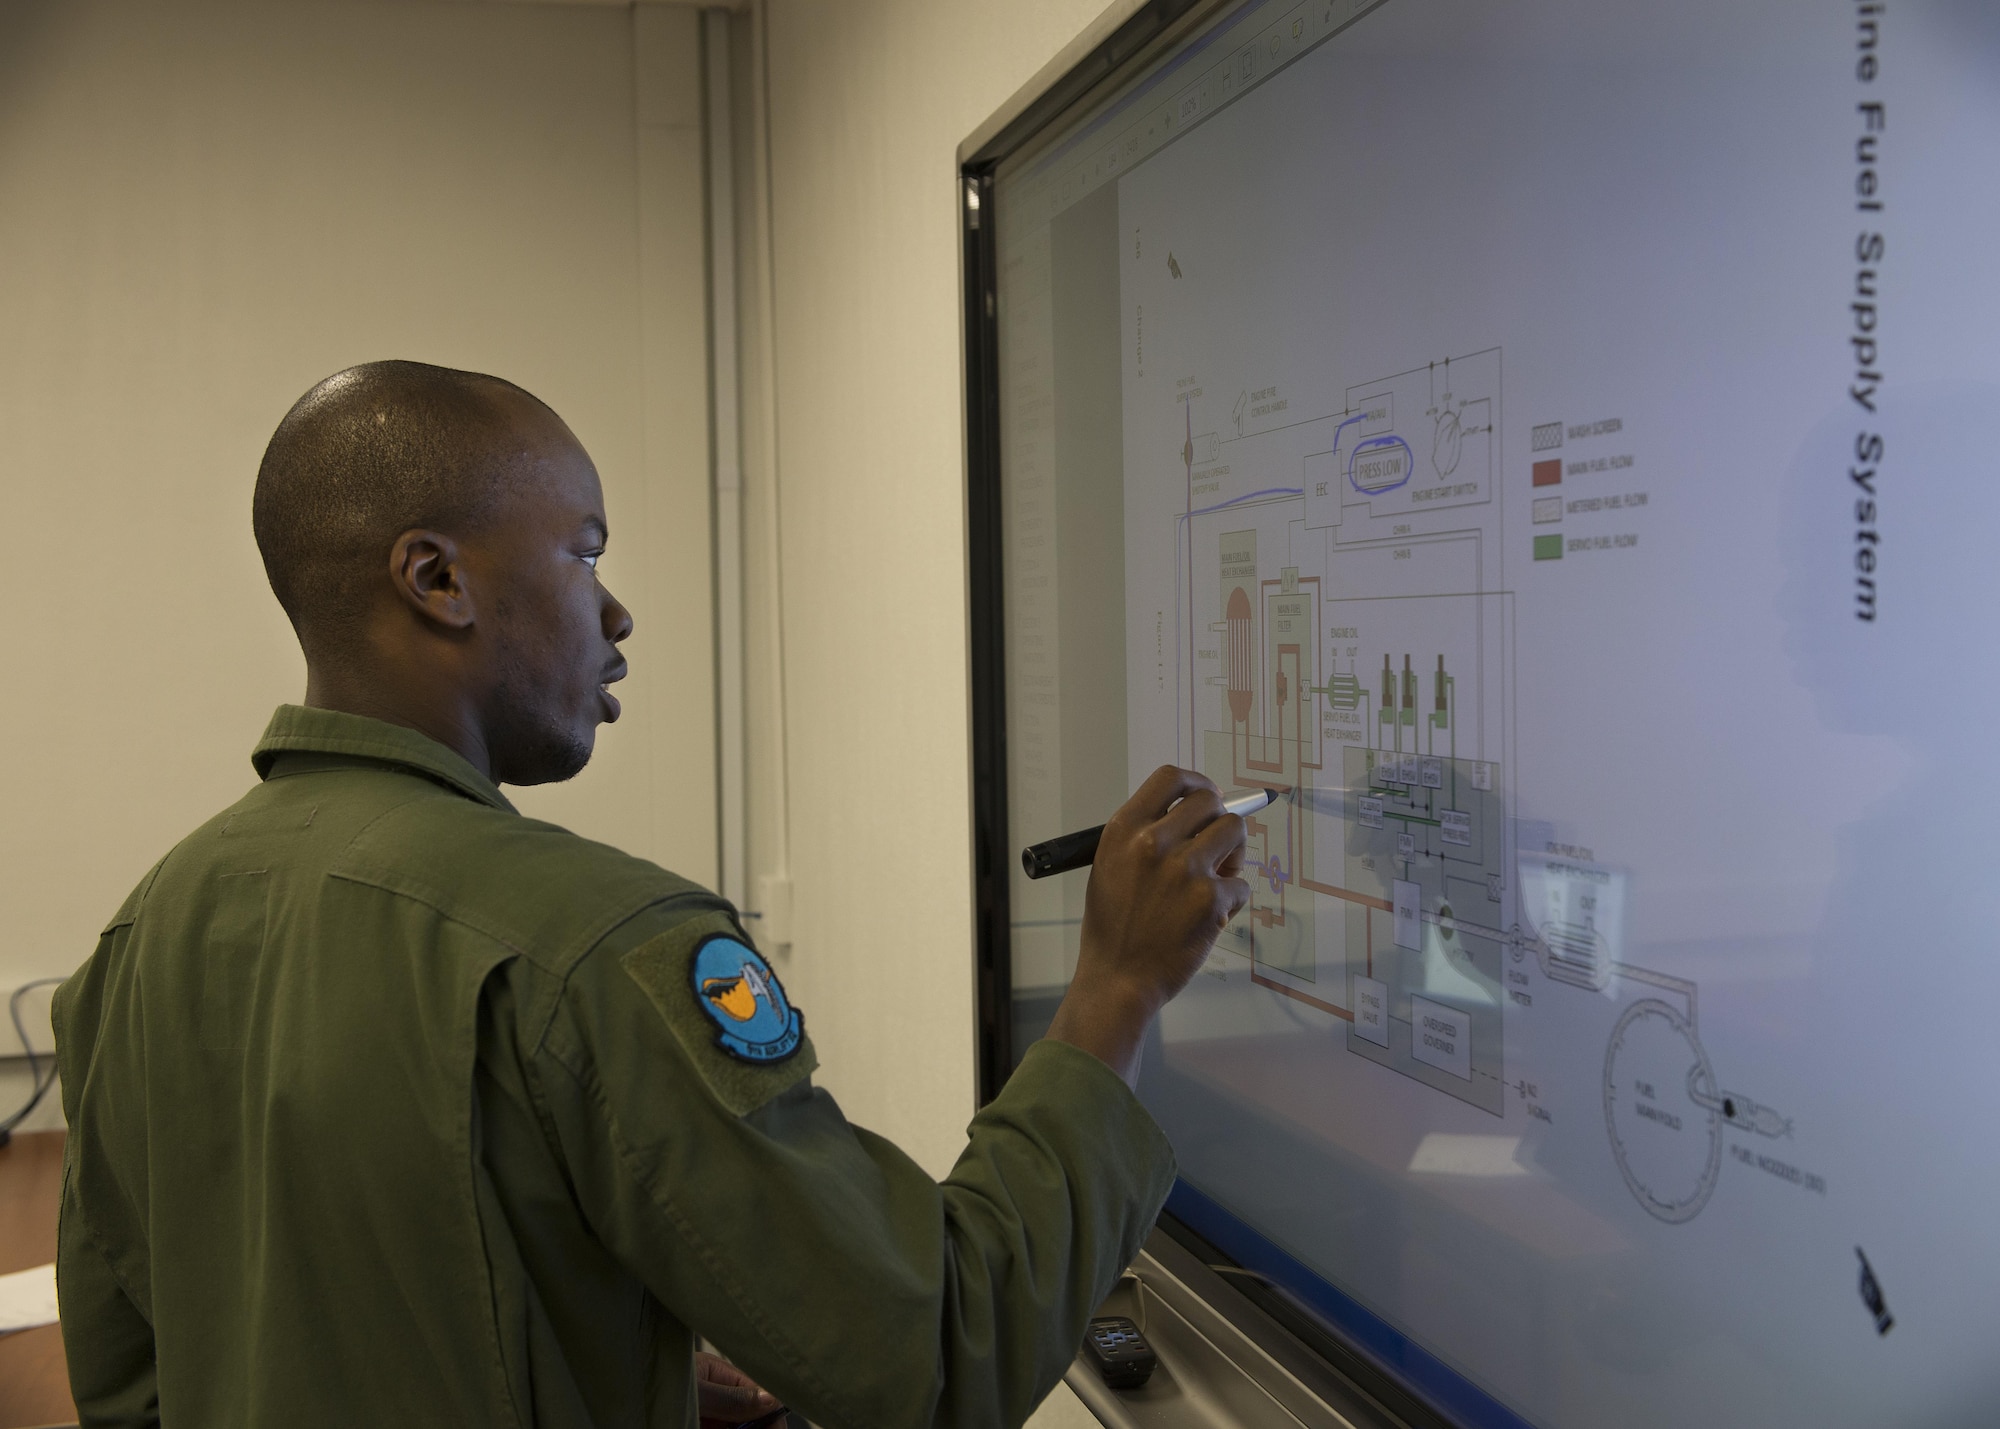 Senior Airman Khalil Muhammad, 9th Airlift Squadron flight engineer, uses a smartboard to go over a C-5M Super Galaxy’s engine fuel supply system July 19, 2016, on Dover Air Force Base, Del. Smartboards like this were part of a $15.5 million renovation that Building 206, which houses the Aircrew Training Systems, recently received. (U.S. Air Force photo/Senior Airman Zachary Cacicia)